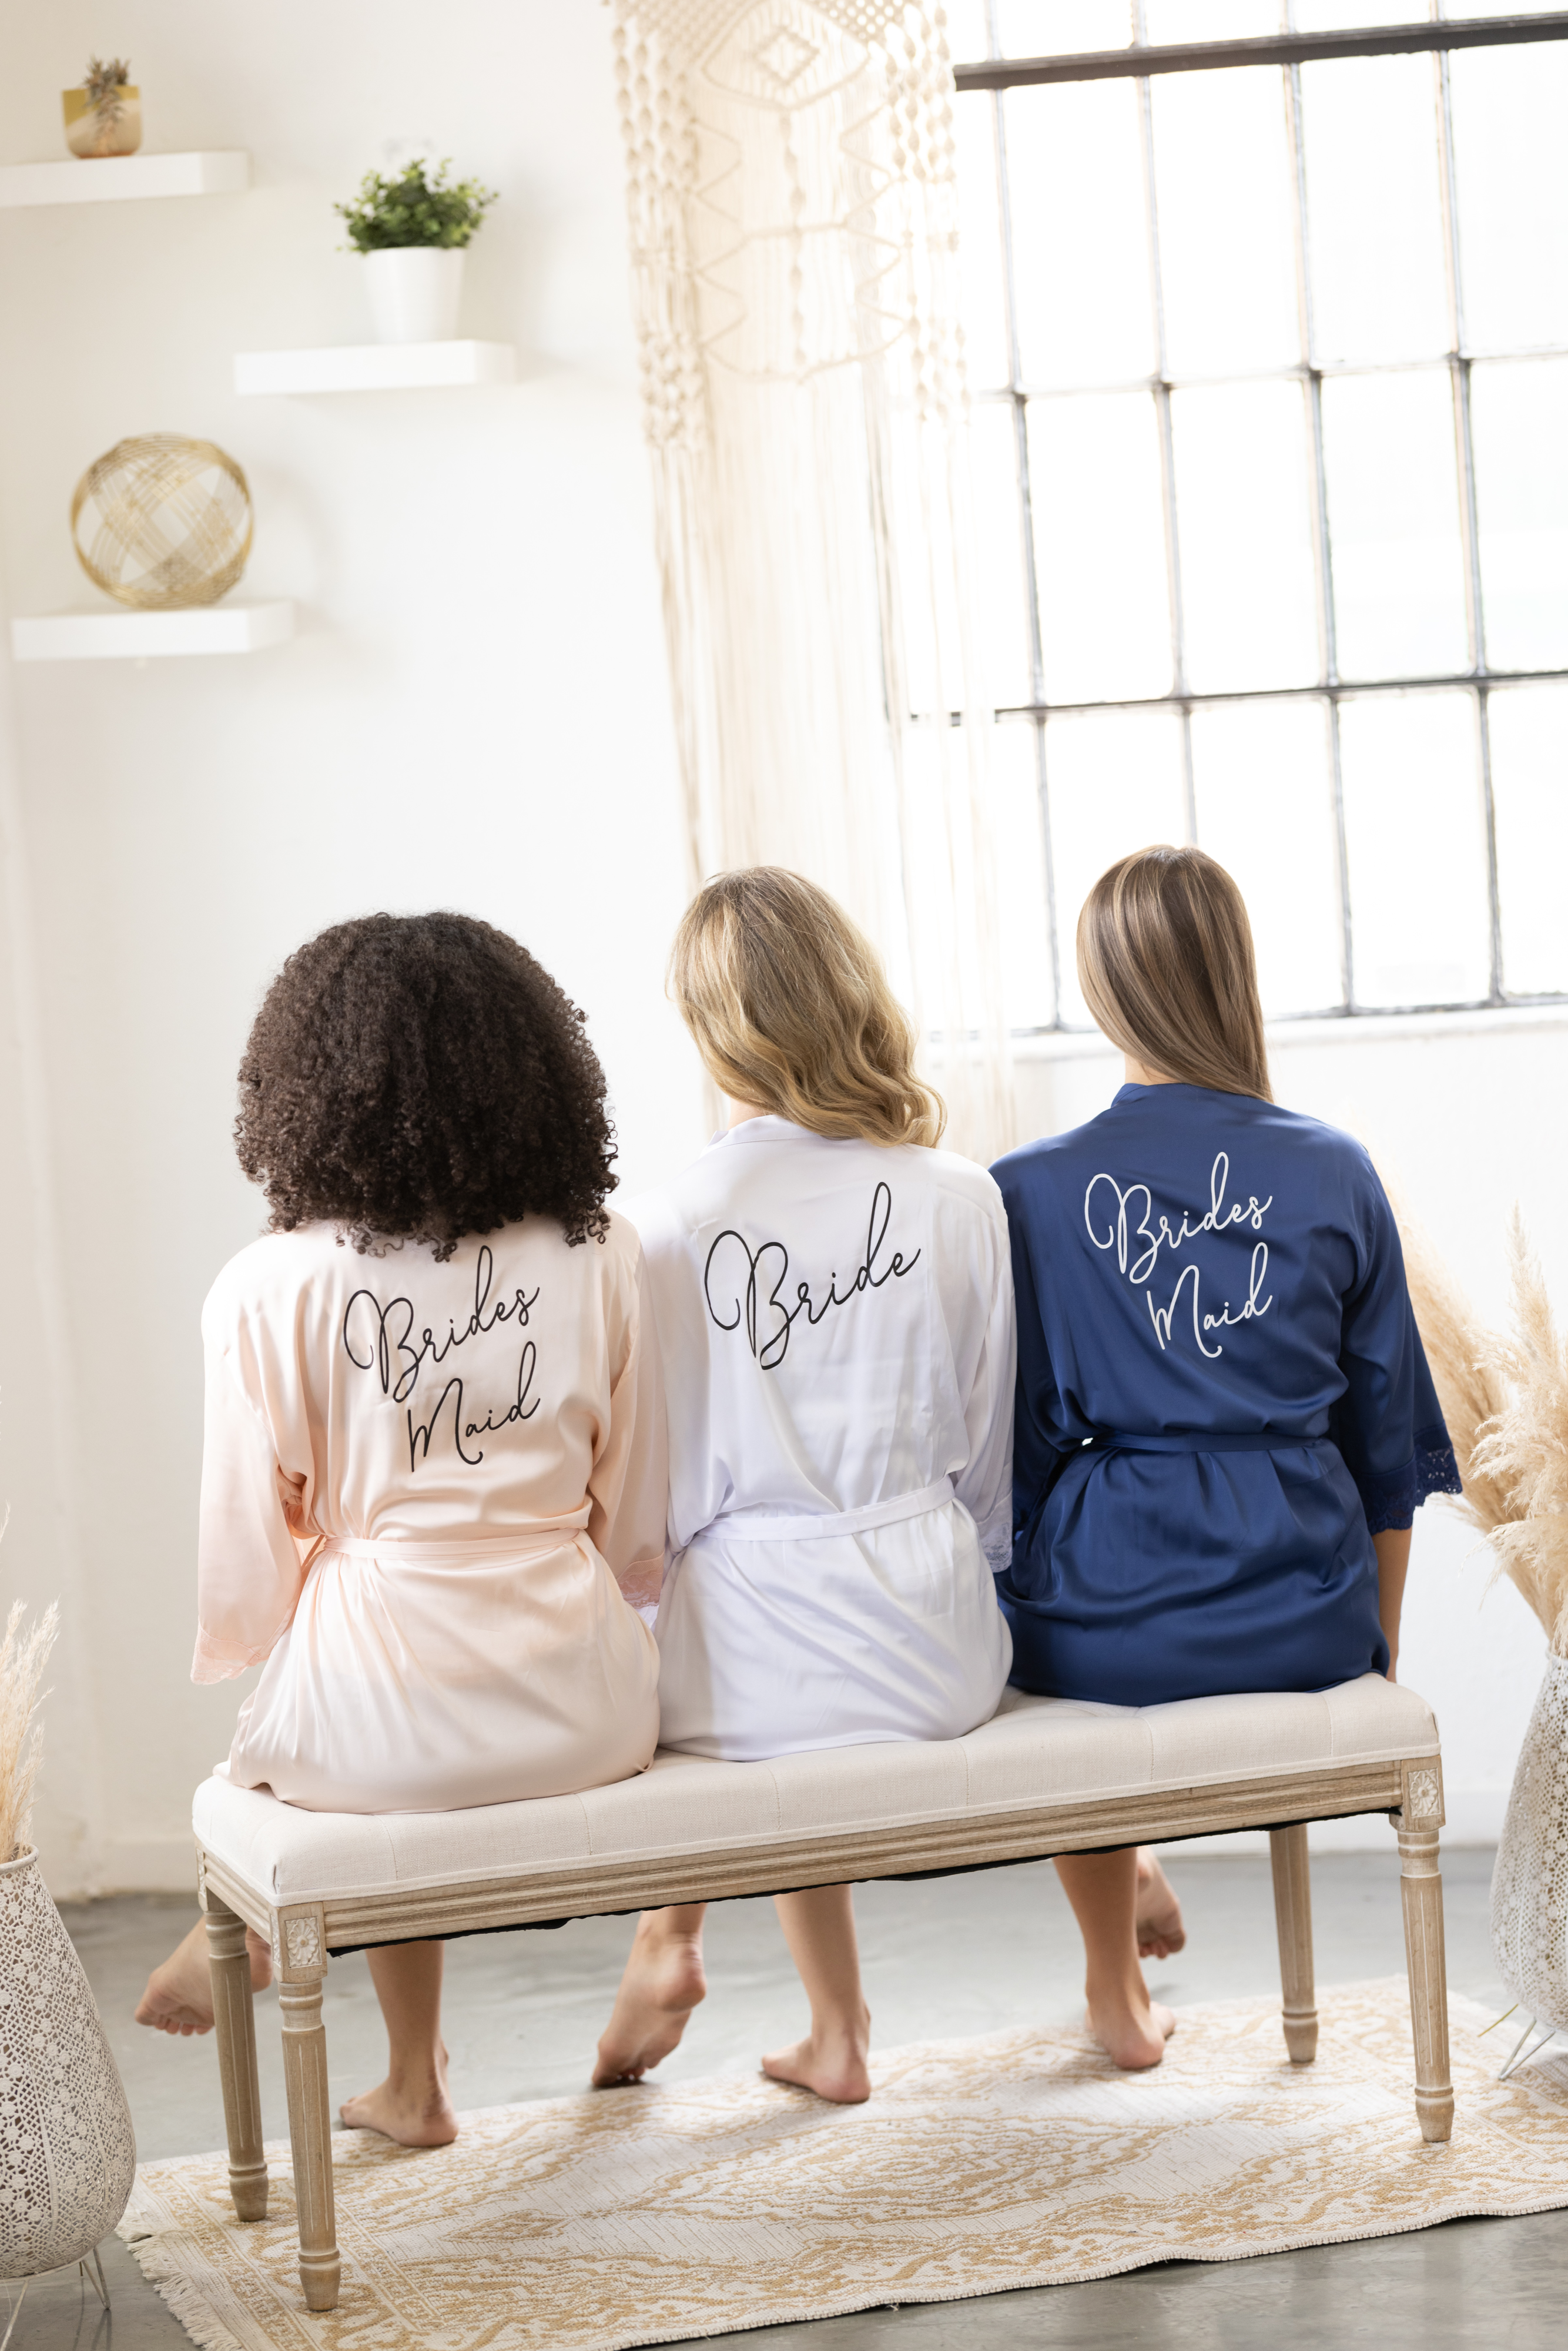 Shop For The Best Bride And Bridesmaid Robes At Bach Bride